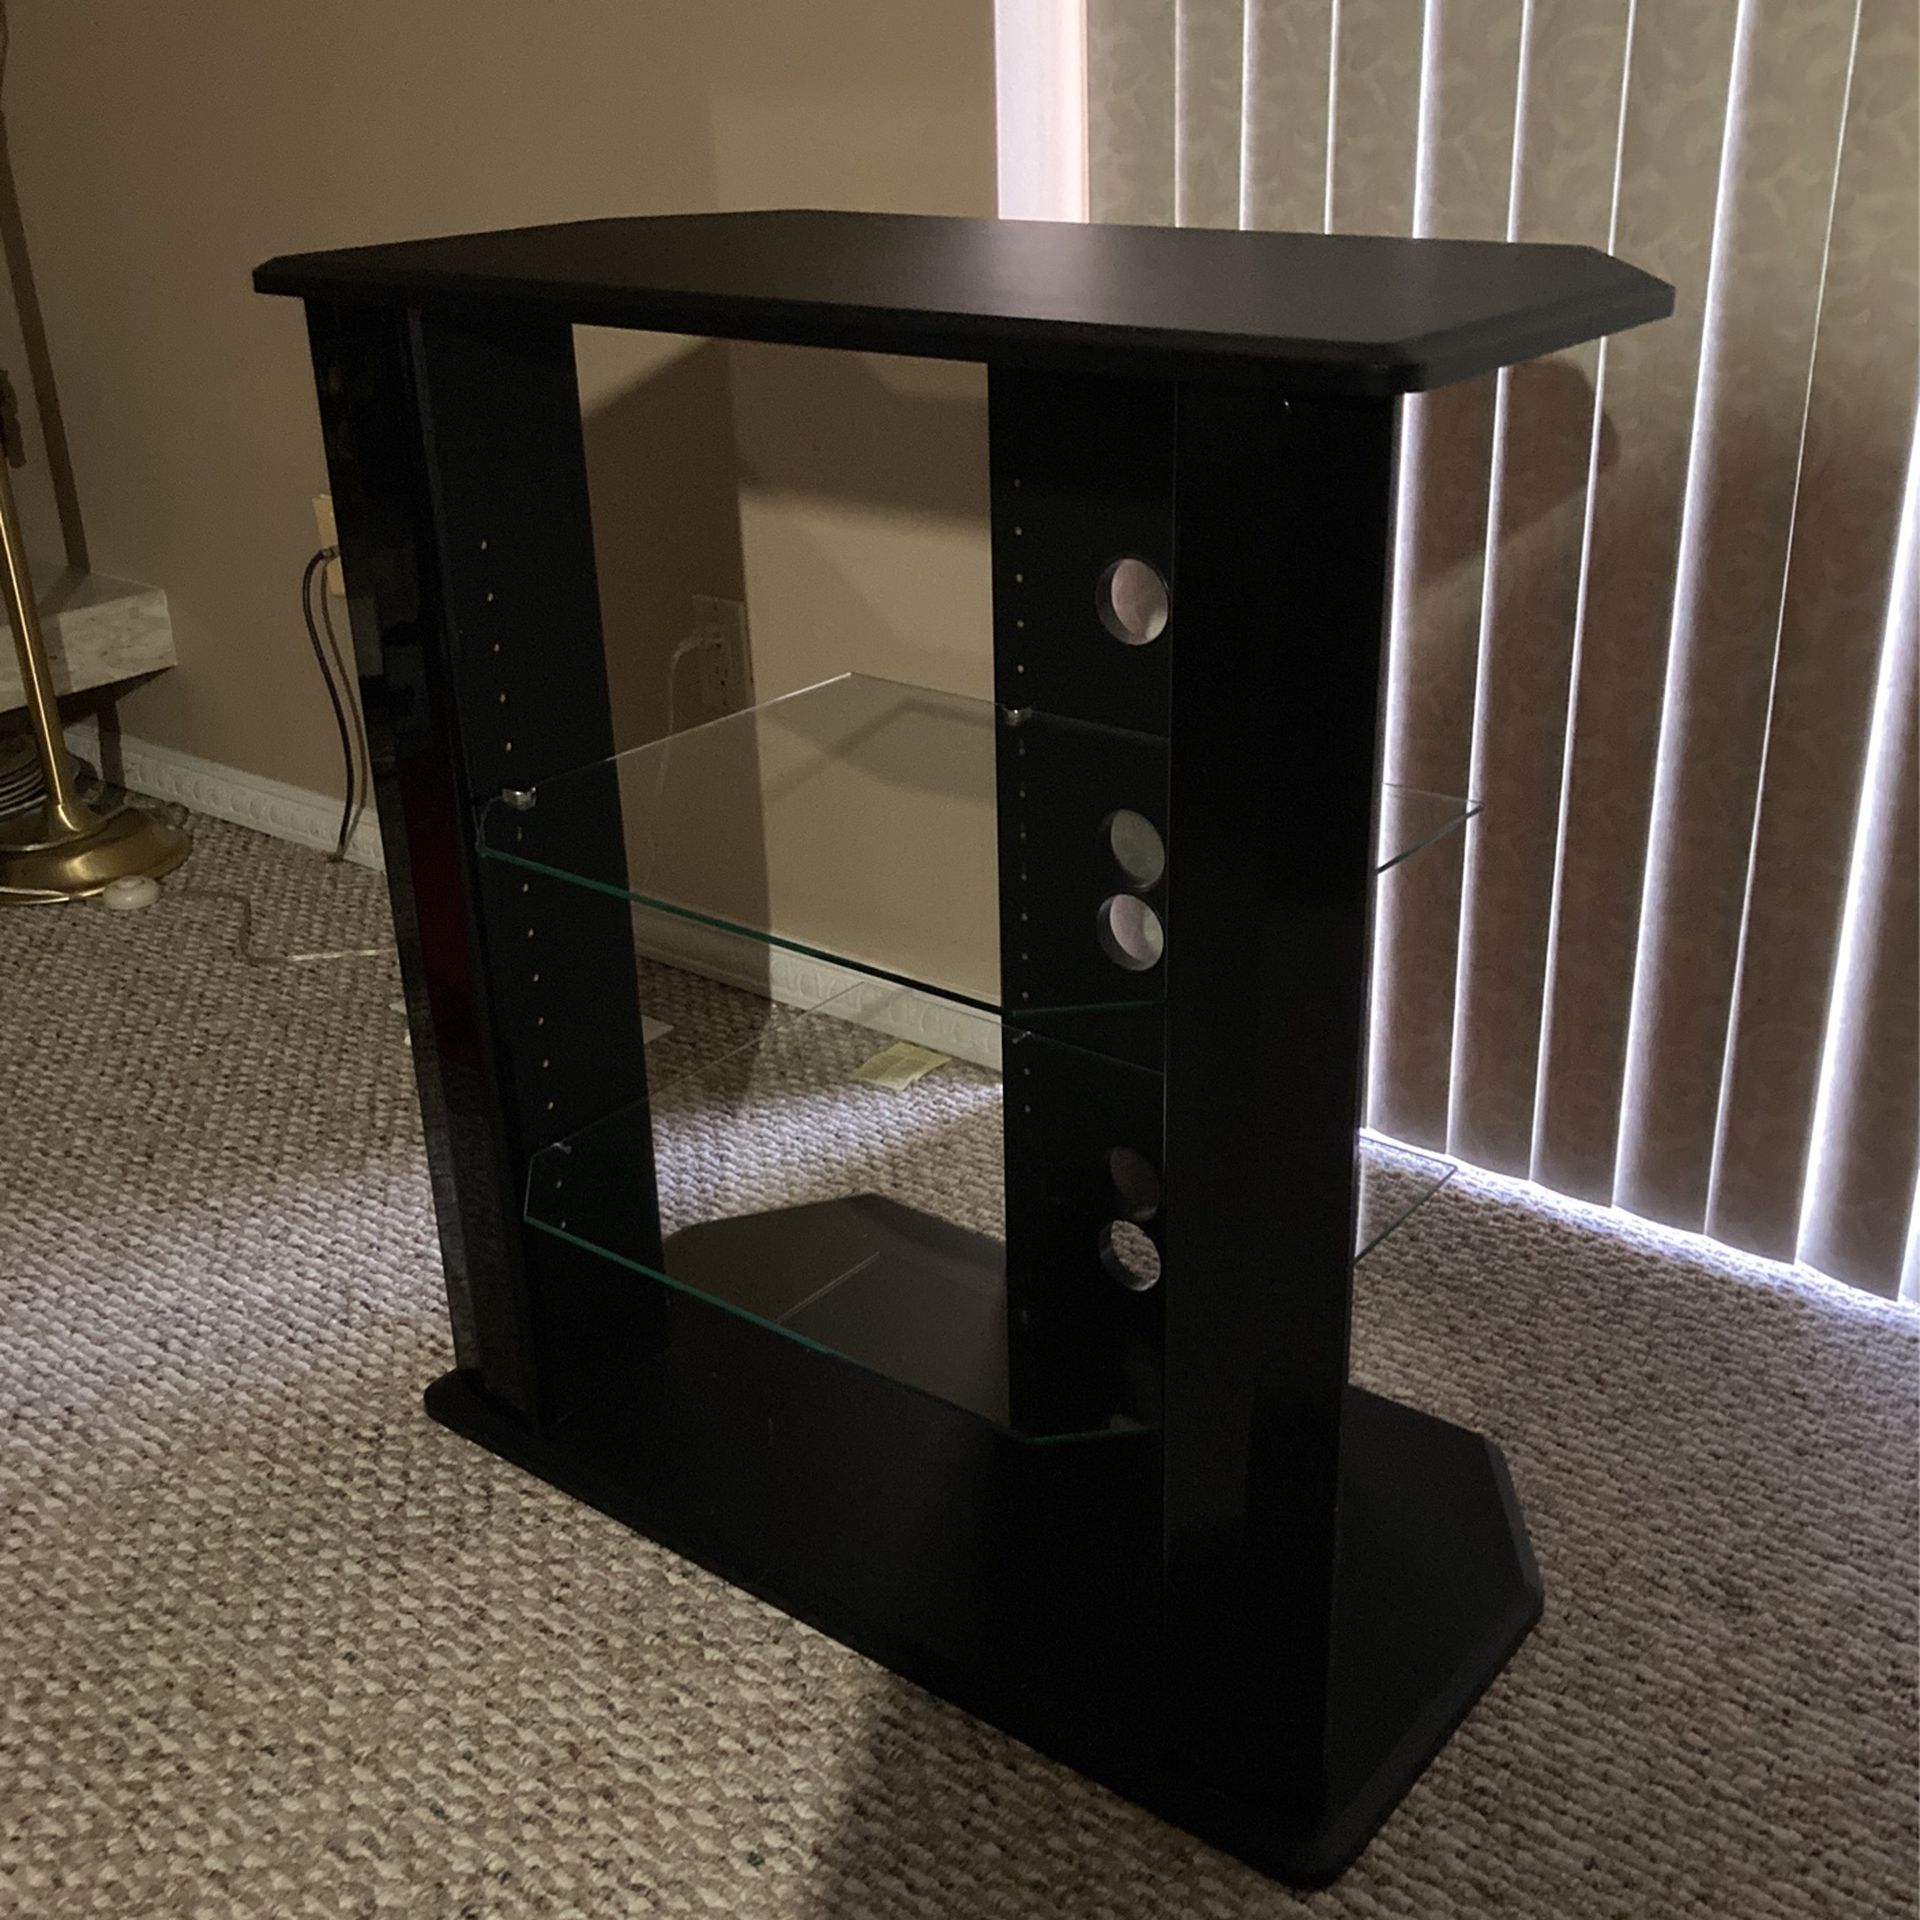 Black TV Stand Two Glass Shelves. No Cracks In The Glass.